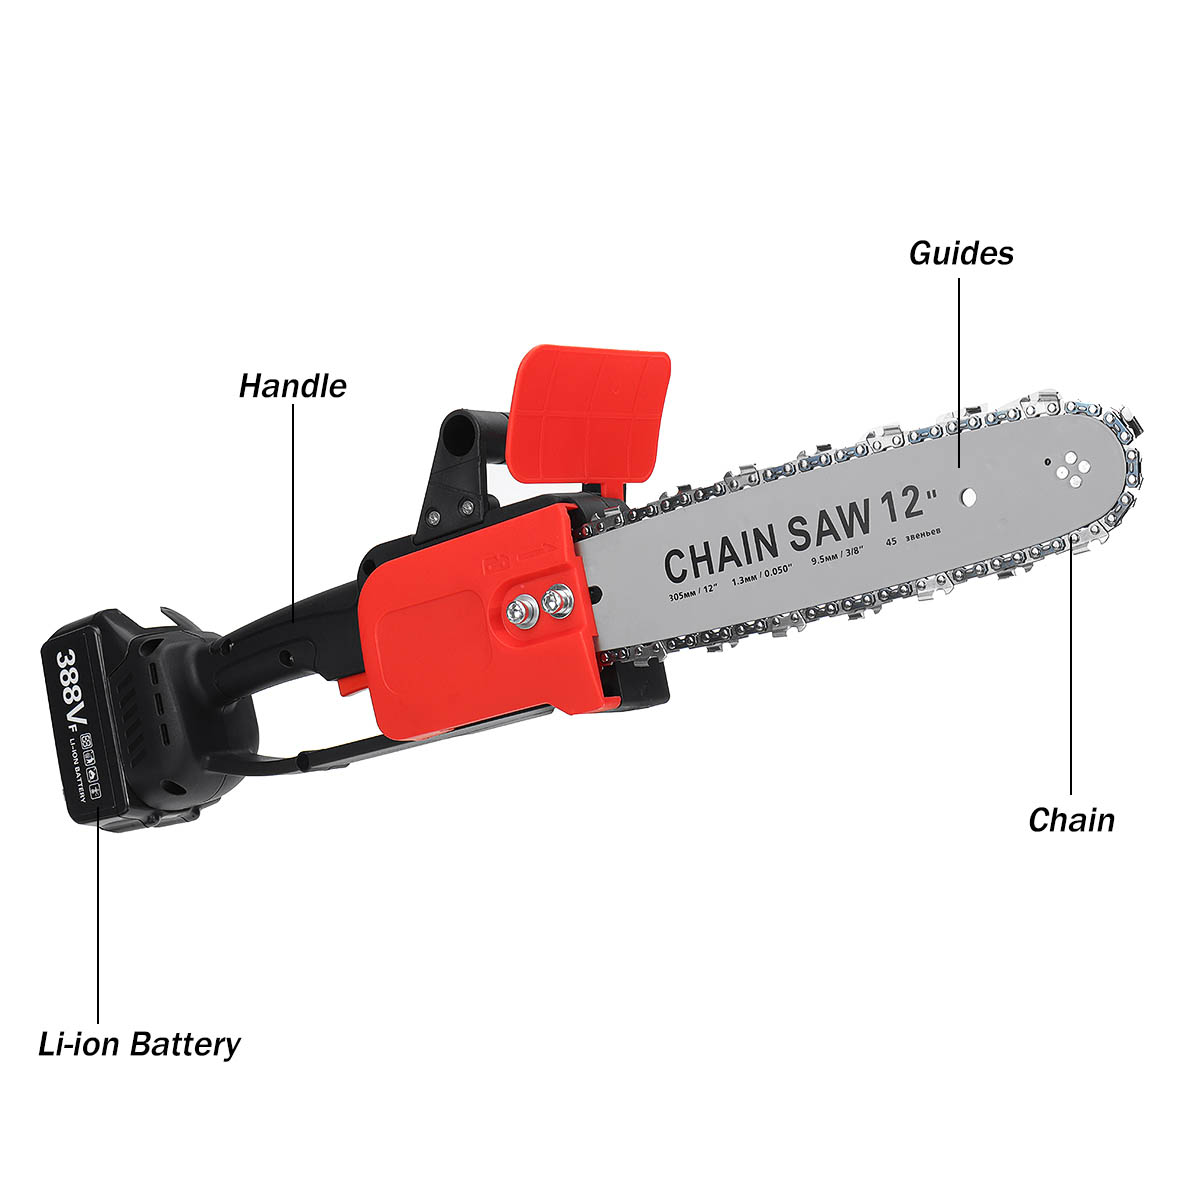 12-Inches-388VF-Cordless-Electric-One-Hand-Saw-Chain-Saw-Woodworking-Cutting-Tools-1903757-3